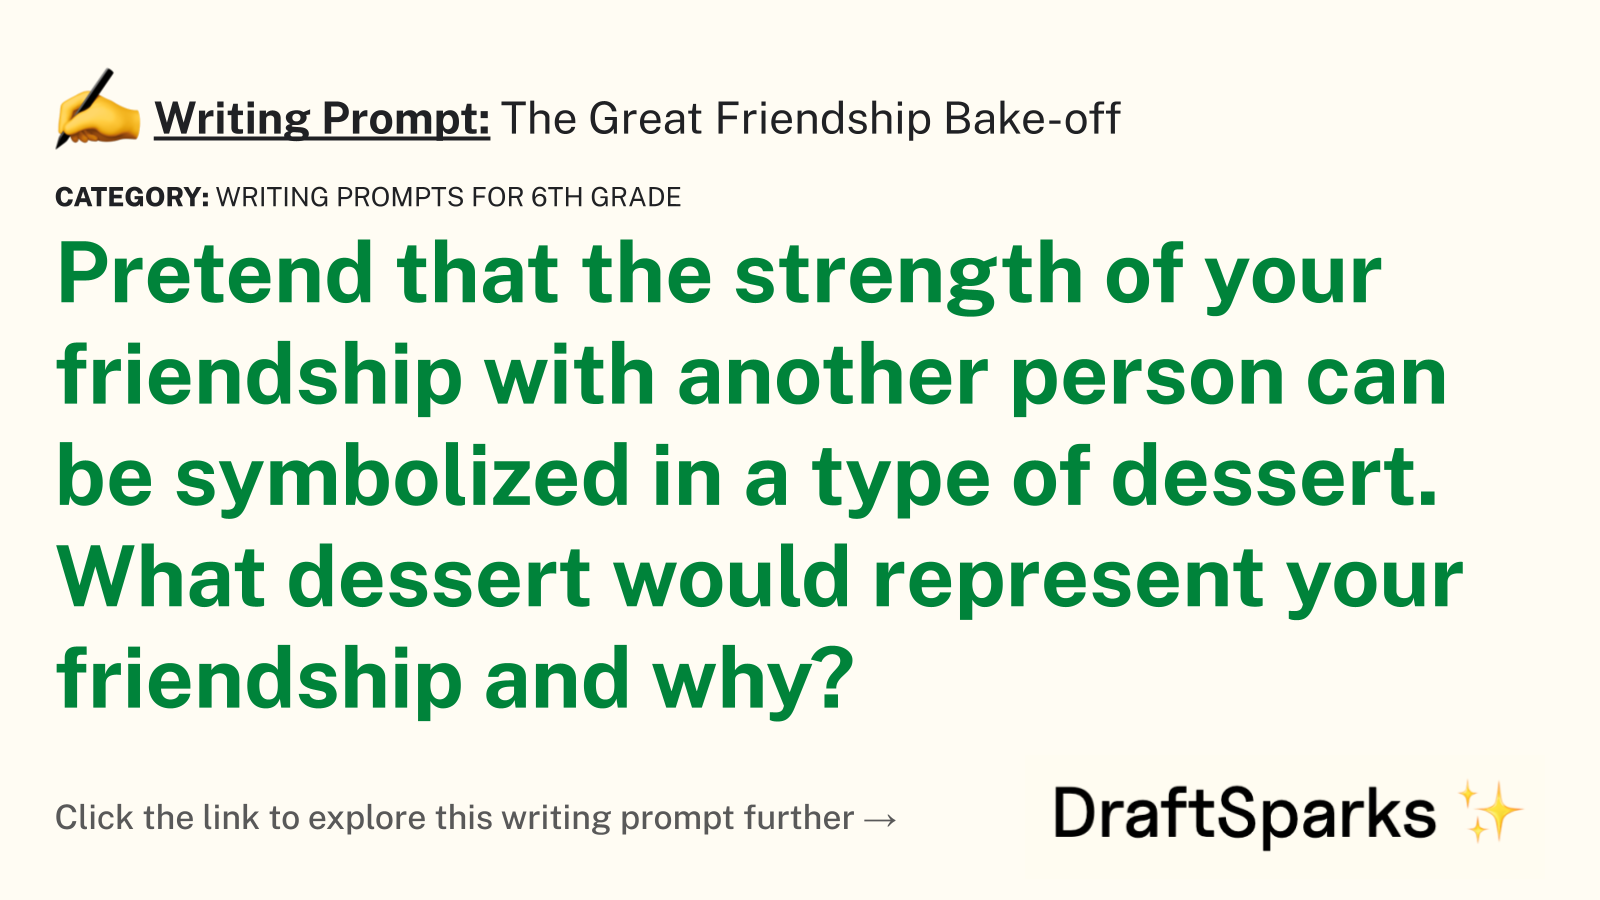 The Great Friendship Bake-off